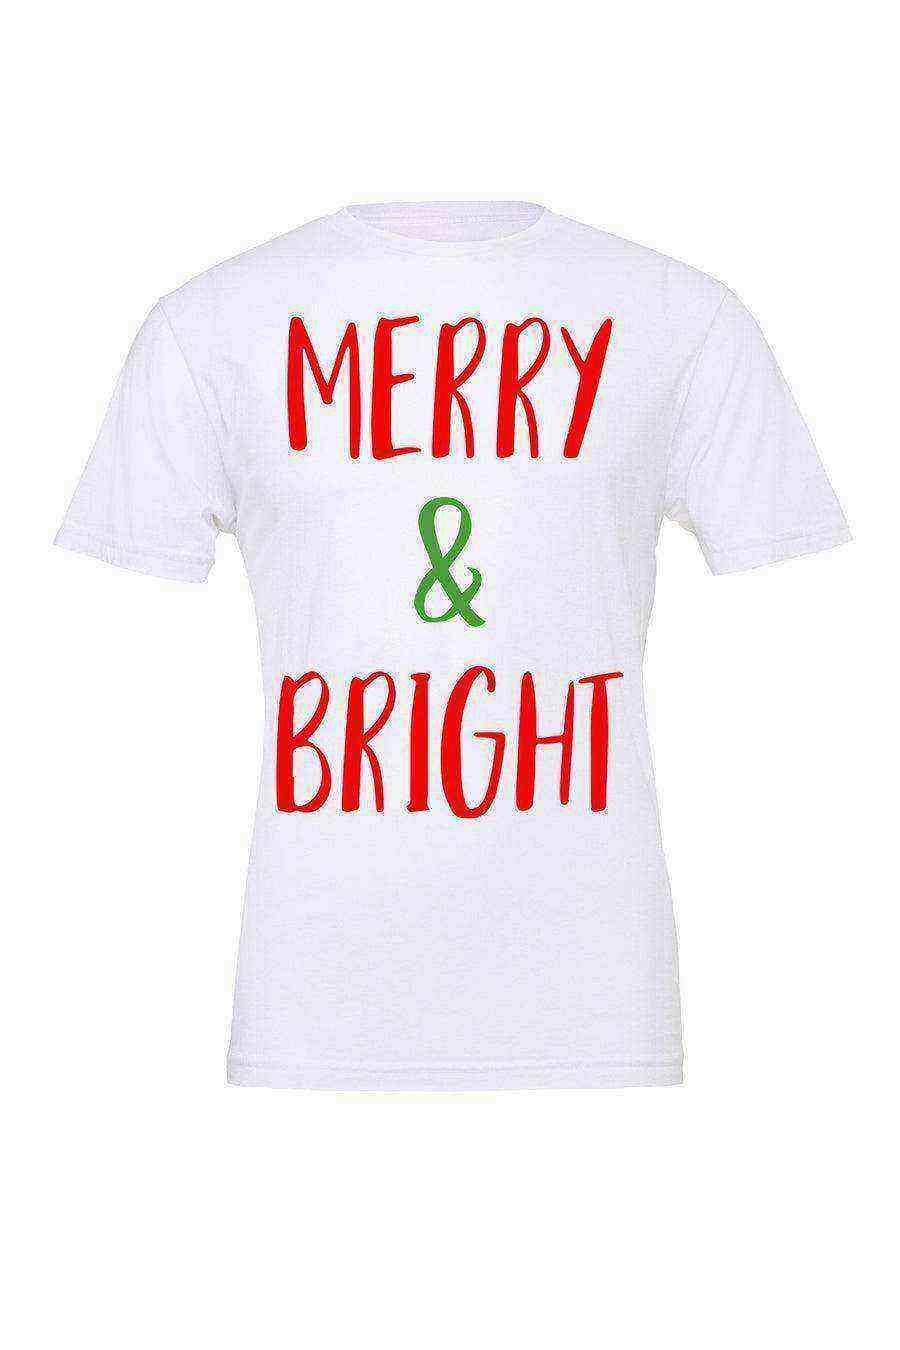 Merry and Bright Shirt - Dylan's Tees